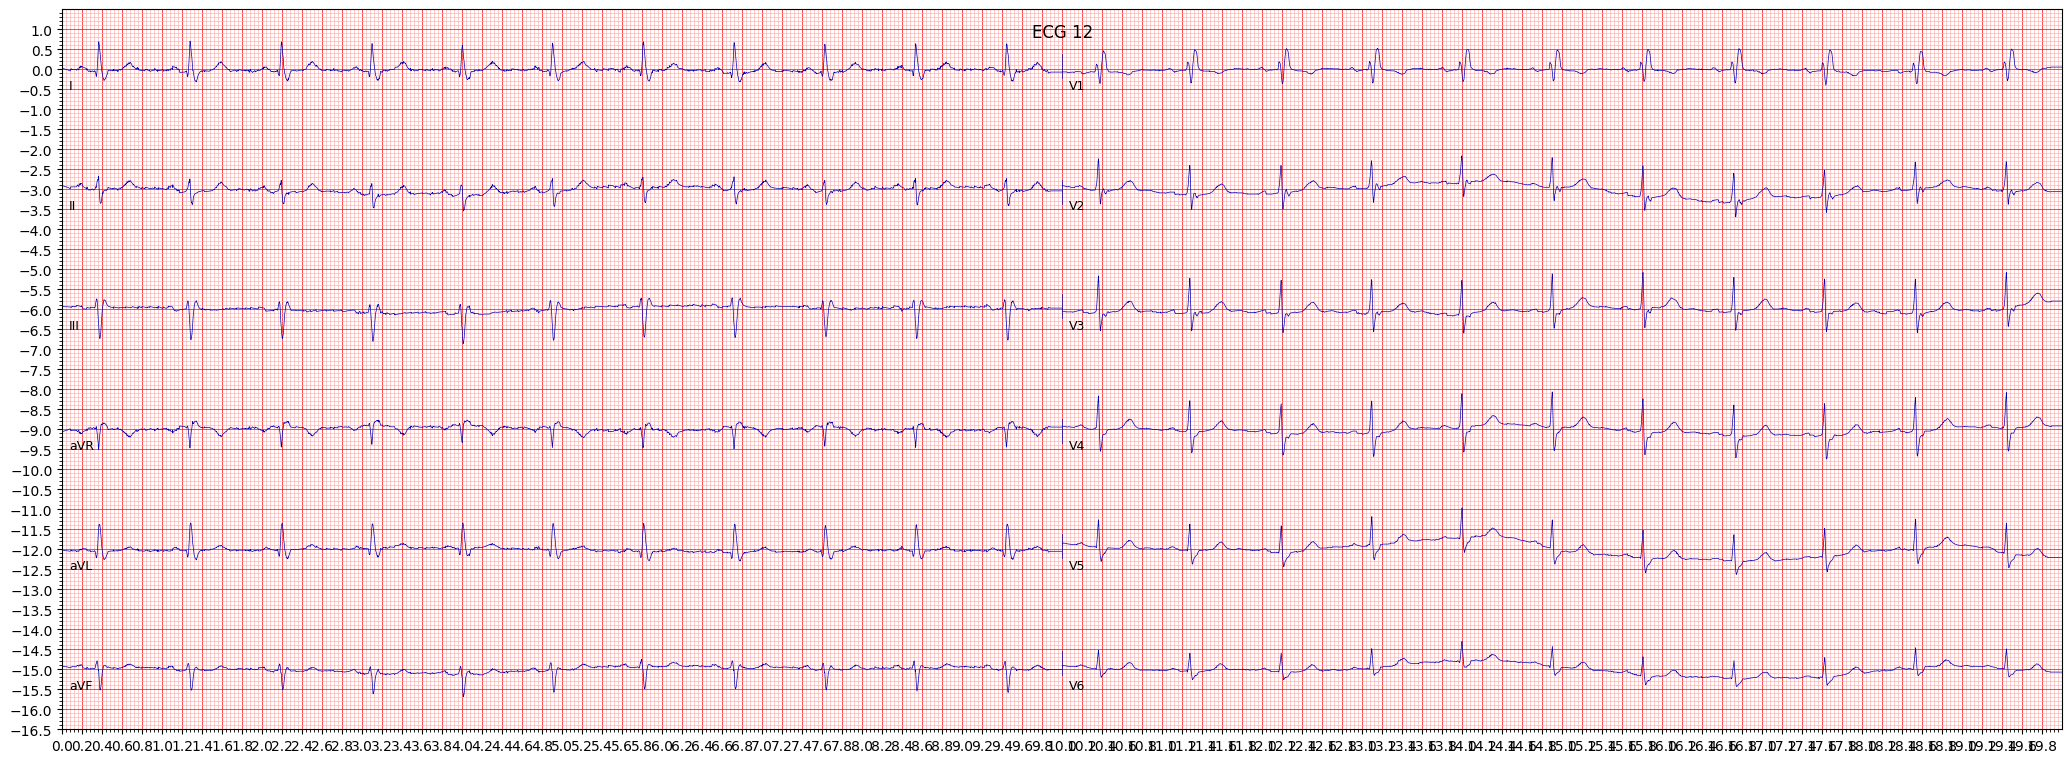 incomplete right bundle branch block (IRBBB) example 188